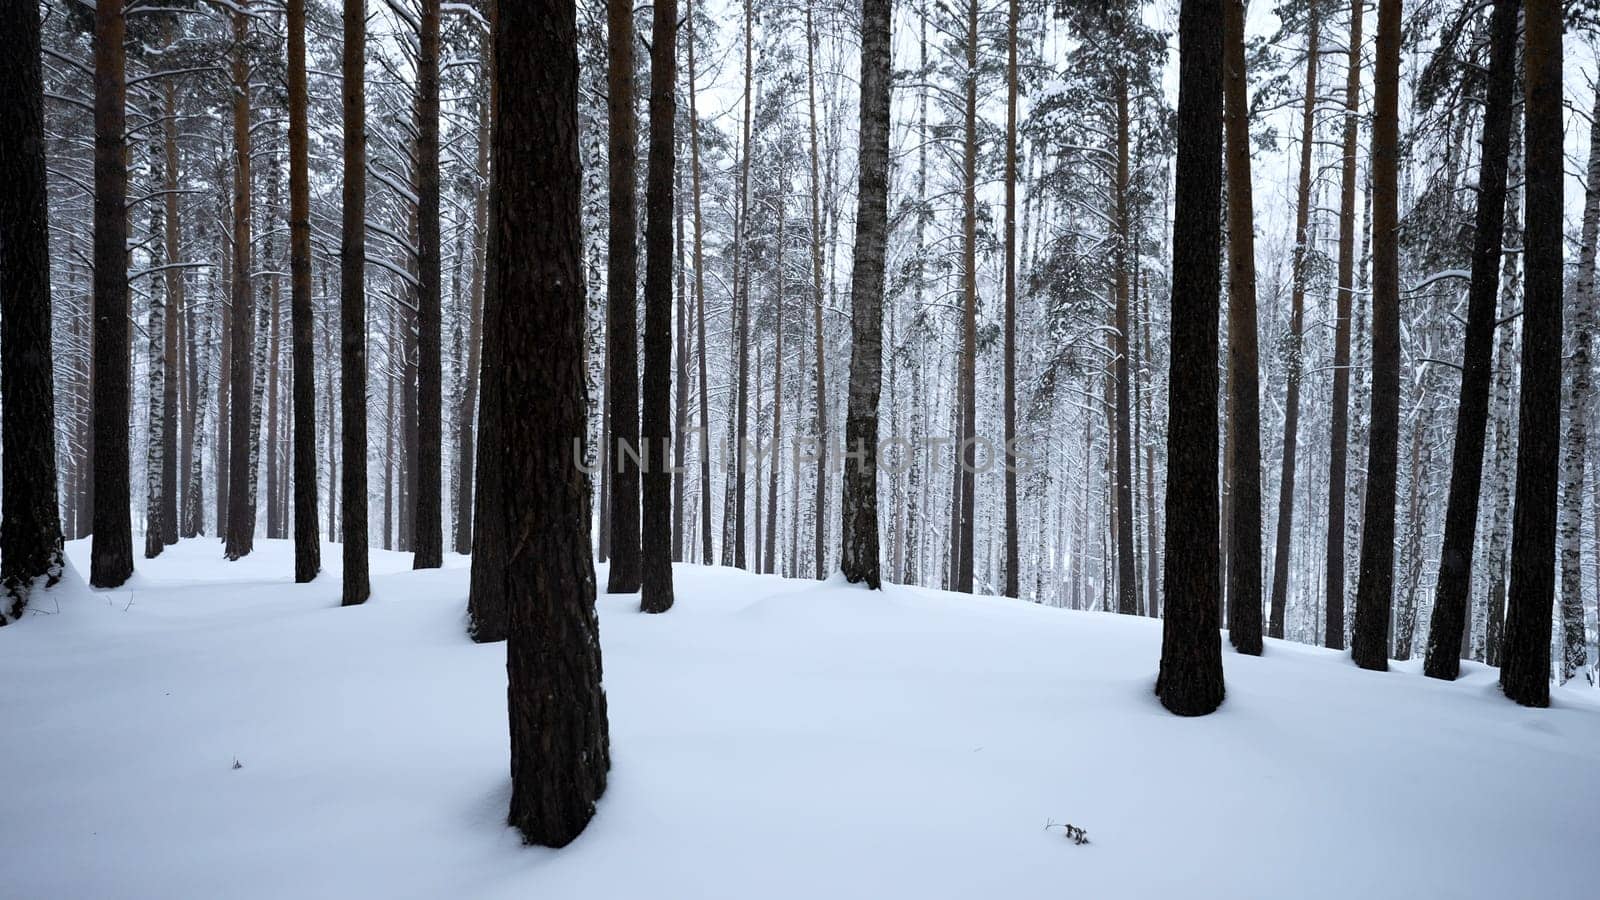 Beautiful scenery with snowy white forest In winter frosty day. Media. Amazing pine scenic view of park woods